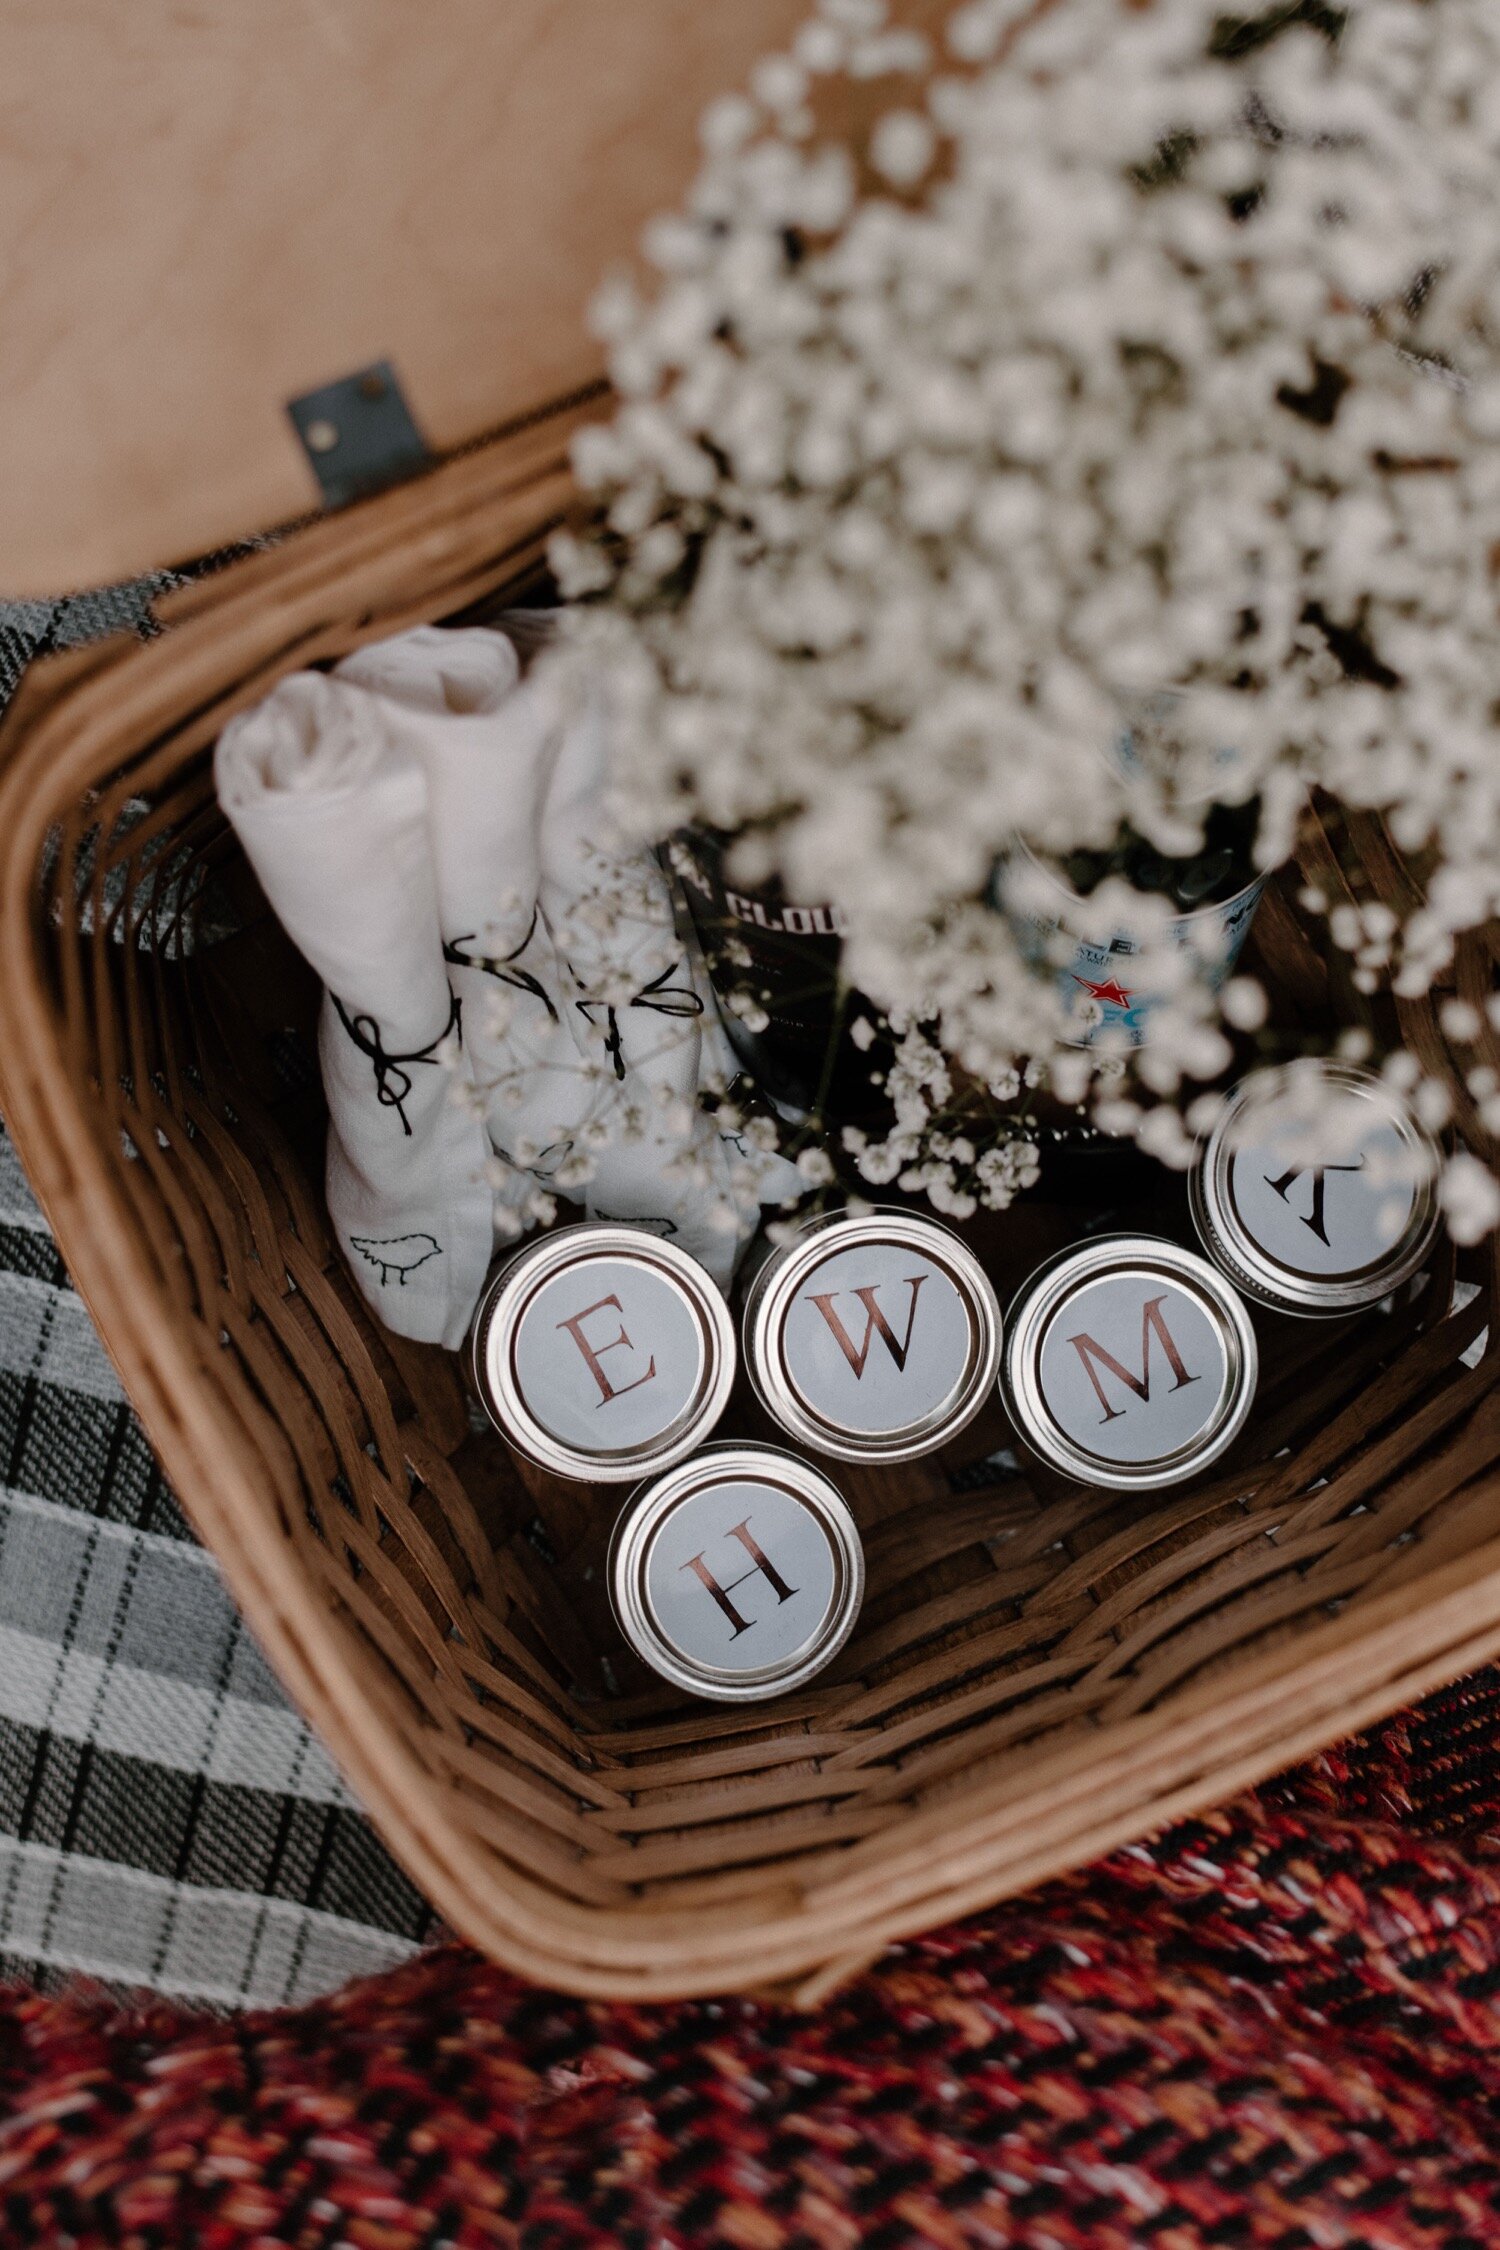 Kirané and Bryan's Washington Campground Wedding with Socially Distant Picnic Reception + DIY Details